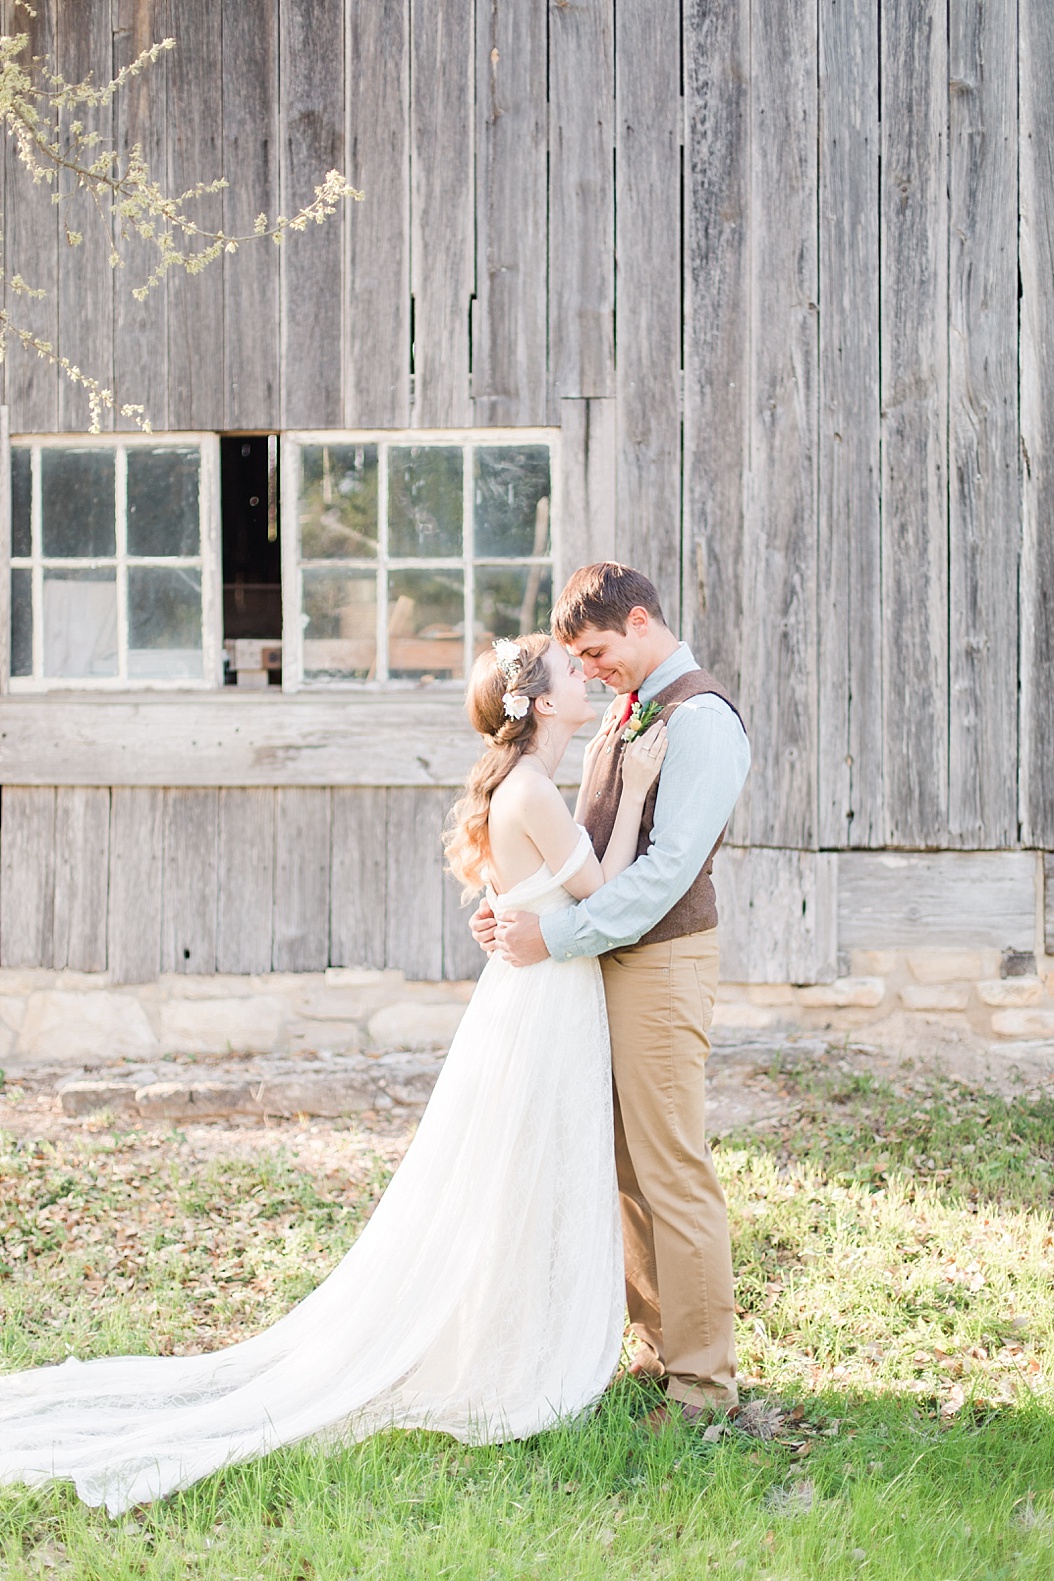 A spring boho wedding with greenery at Cherokee Rose Venue in Comfort Texas by Boerne Wedding Photographer Allison Jeffers Wedding Photography 0029